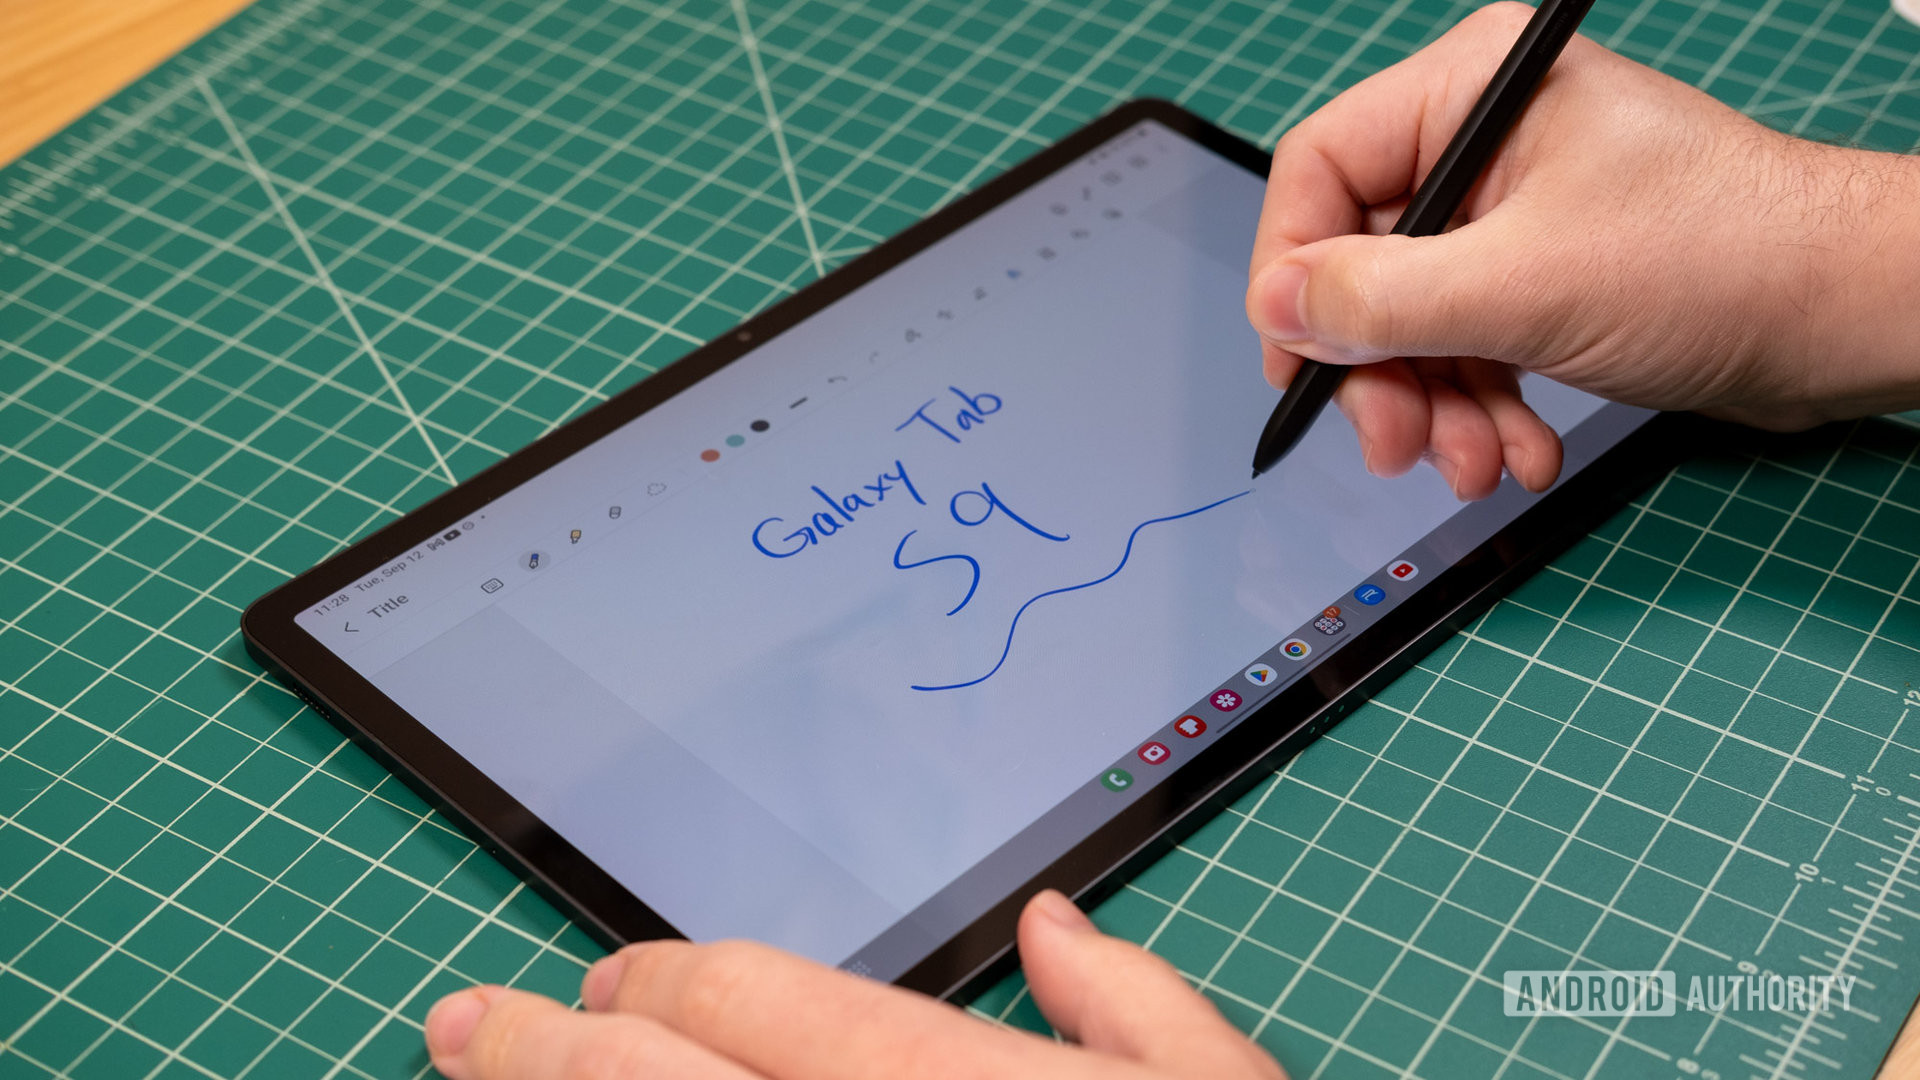 Samsung Galaxy Tab S9 and S Pen note taking